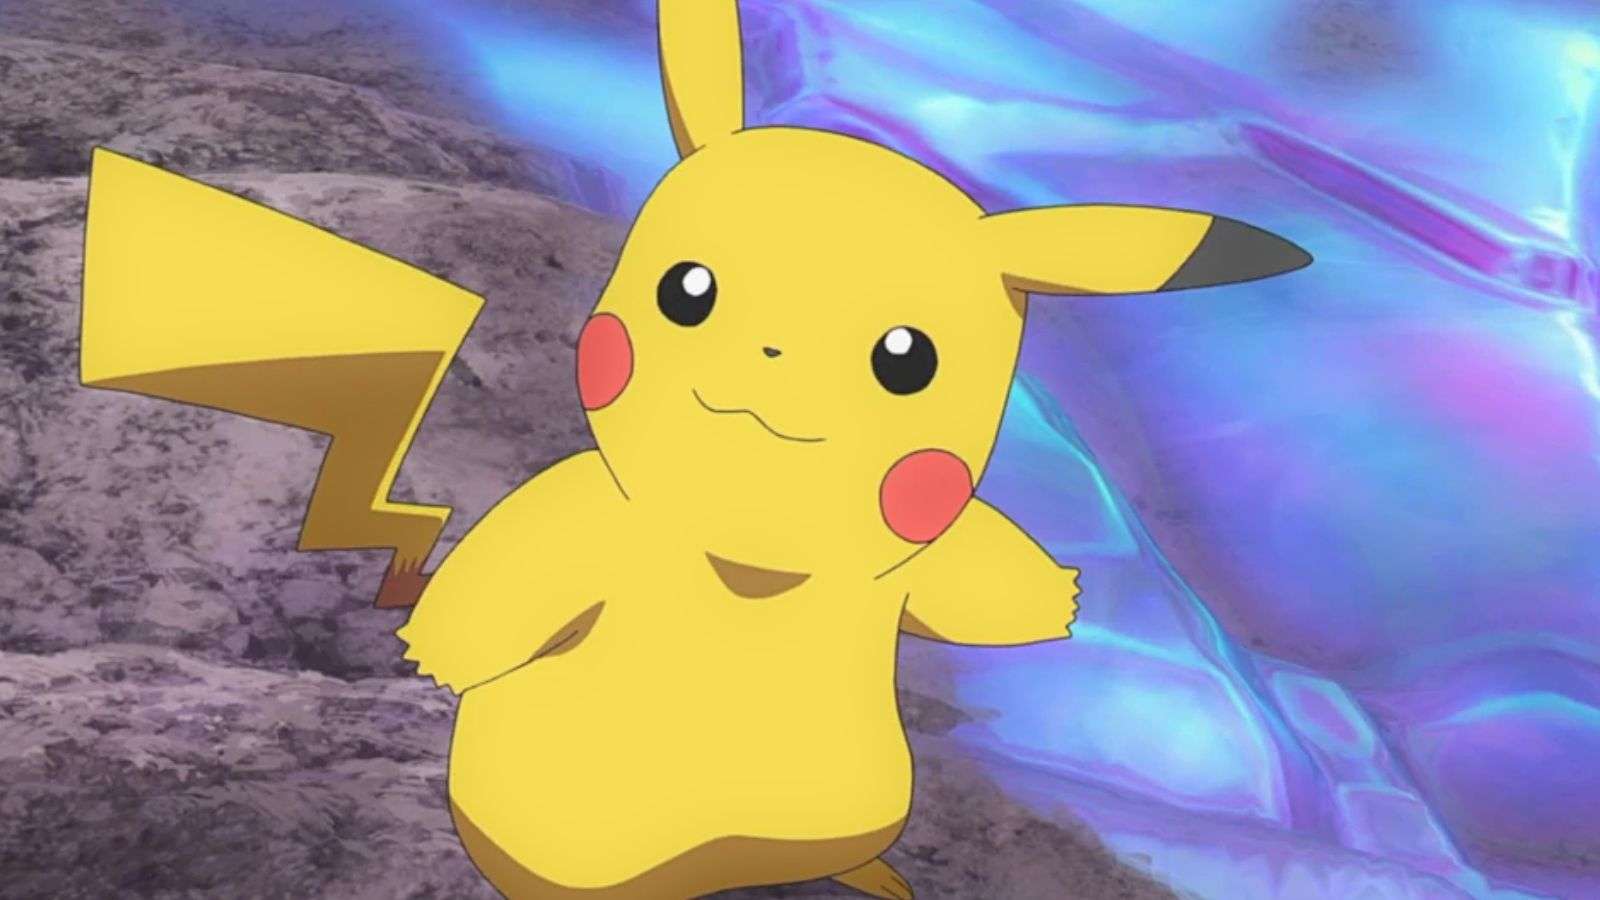 Ash's Pikachu anime by water.